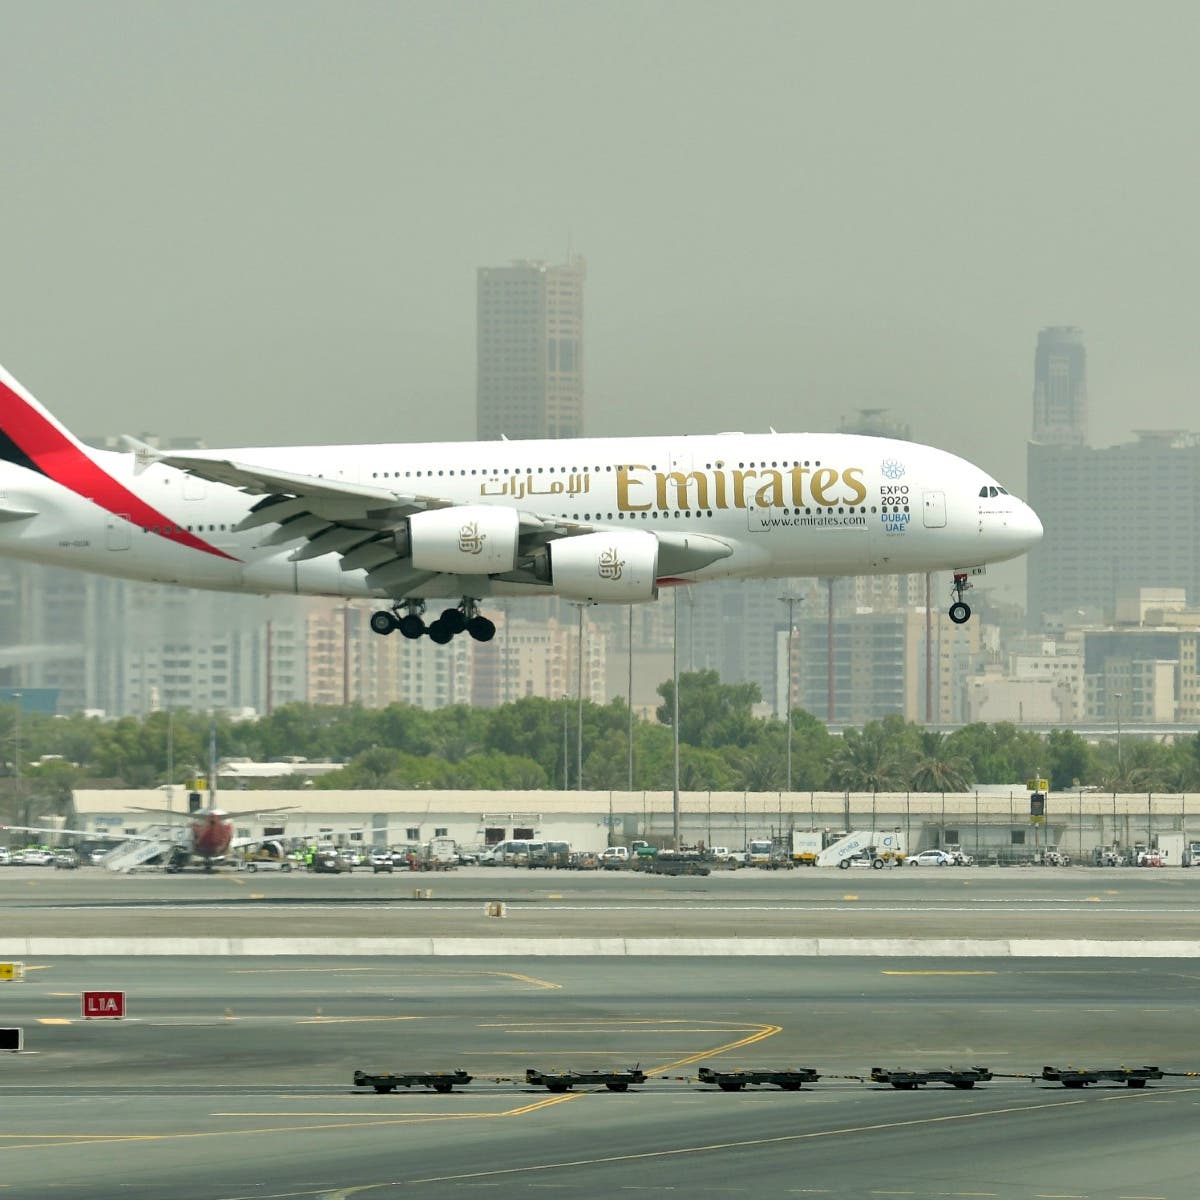 Emirates airline plans to add ‘premium economy’ cabins to 105 aircraft: President